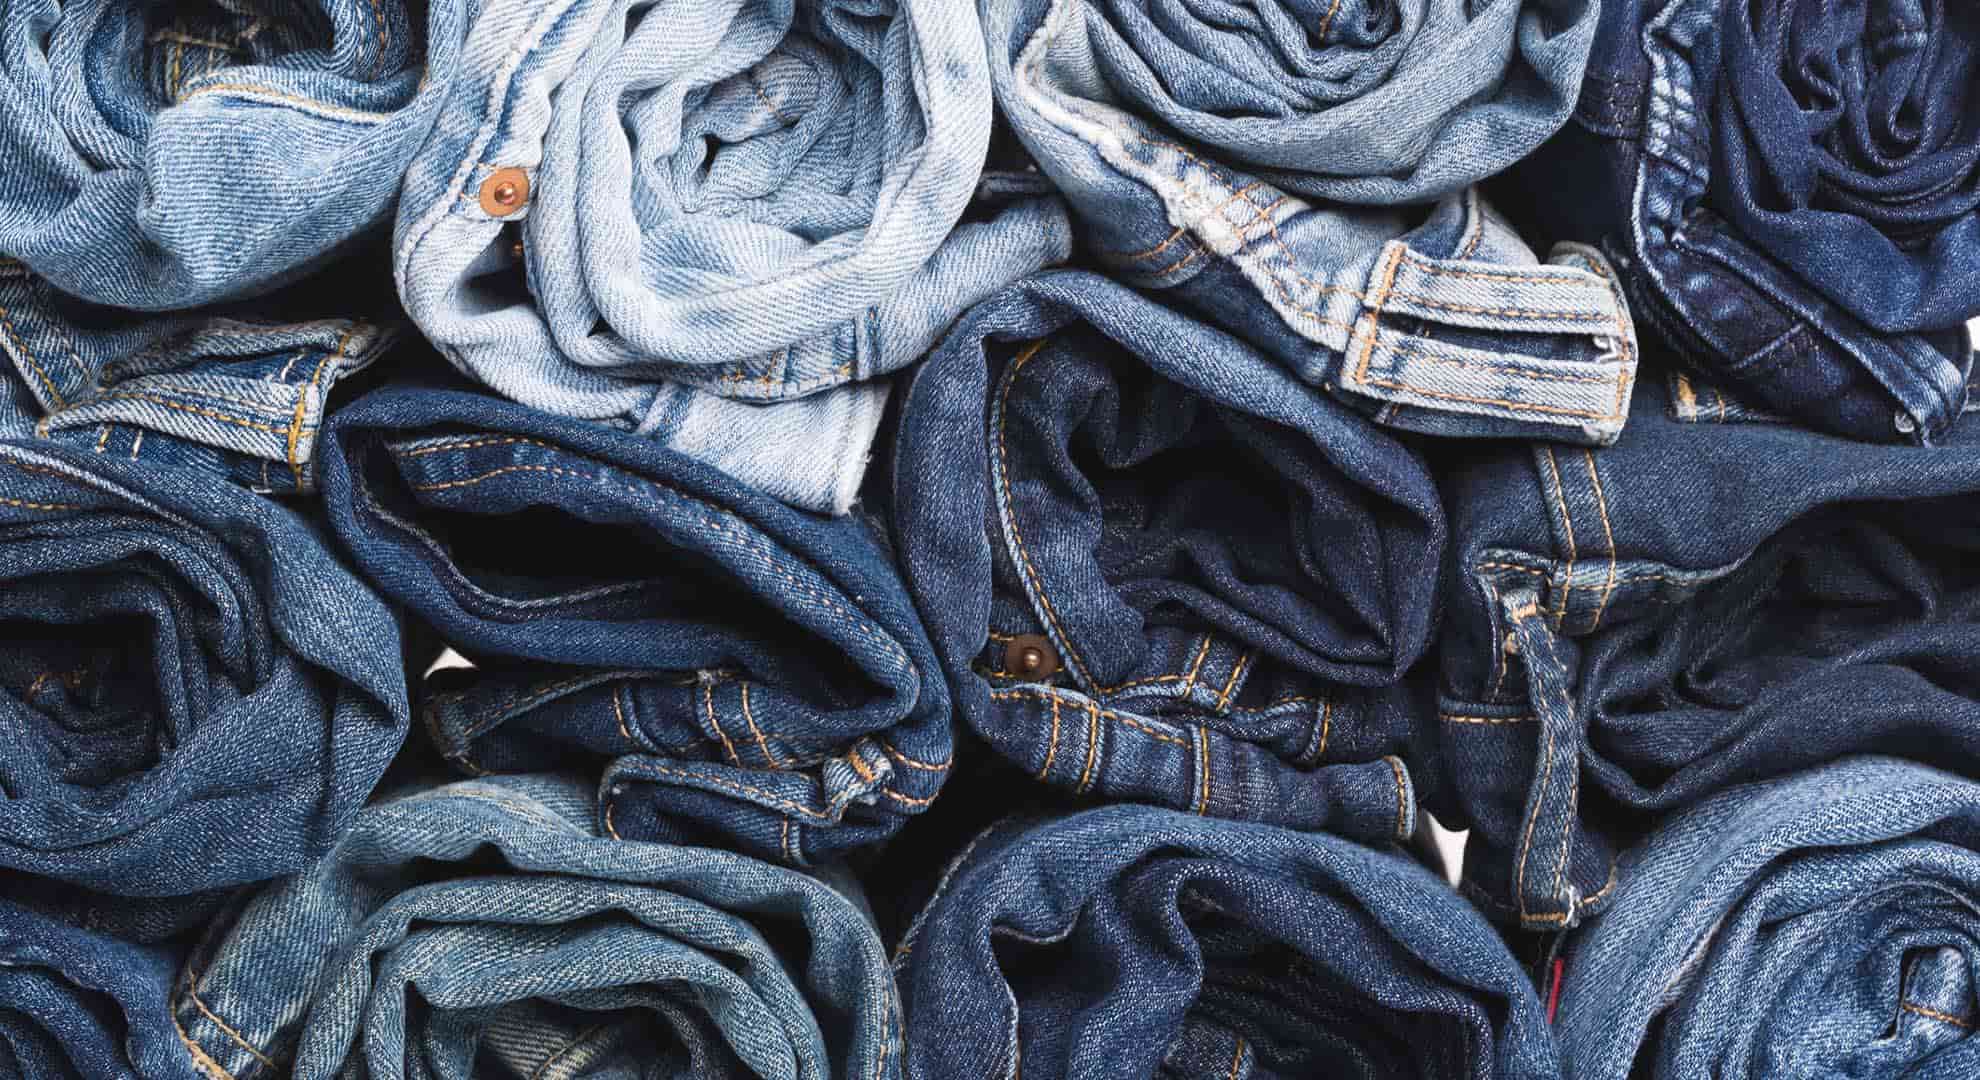 Photo of rolled up denim jeans in rows representing circular textiles